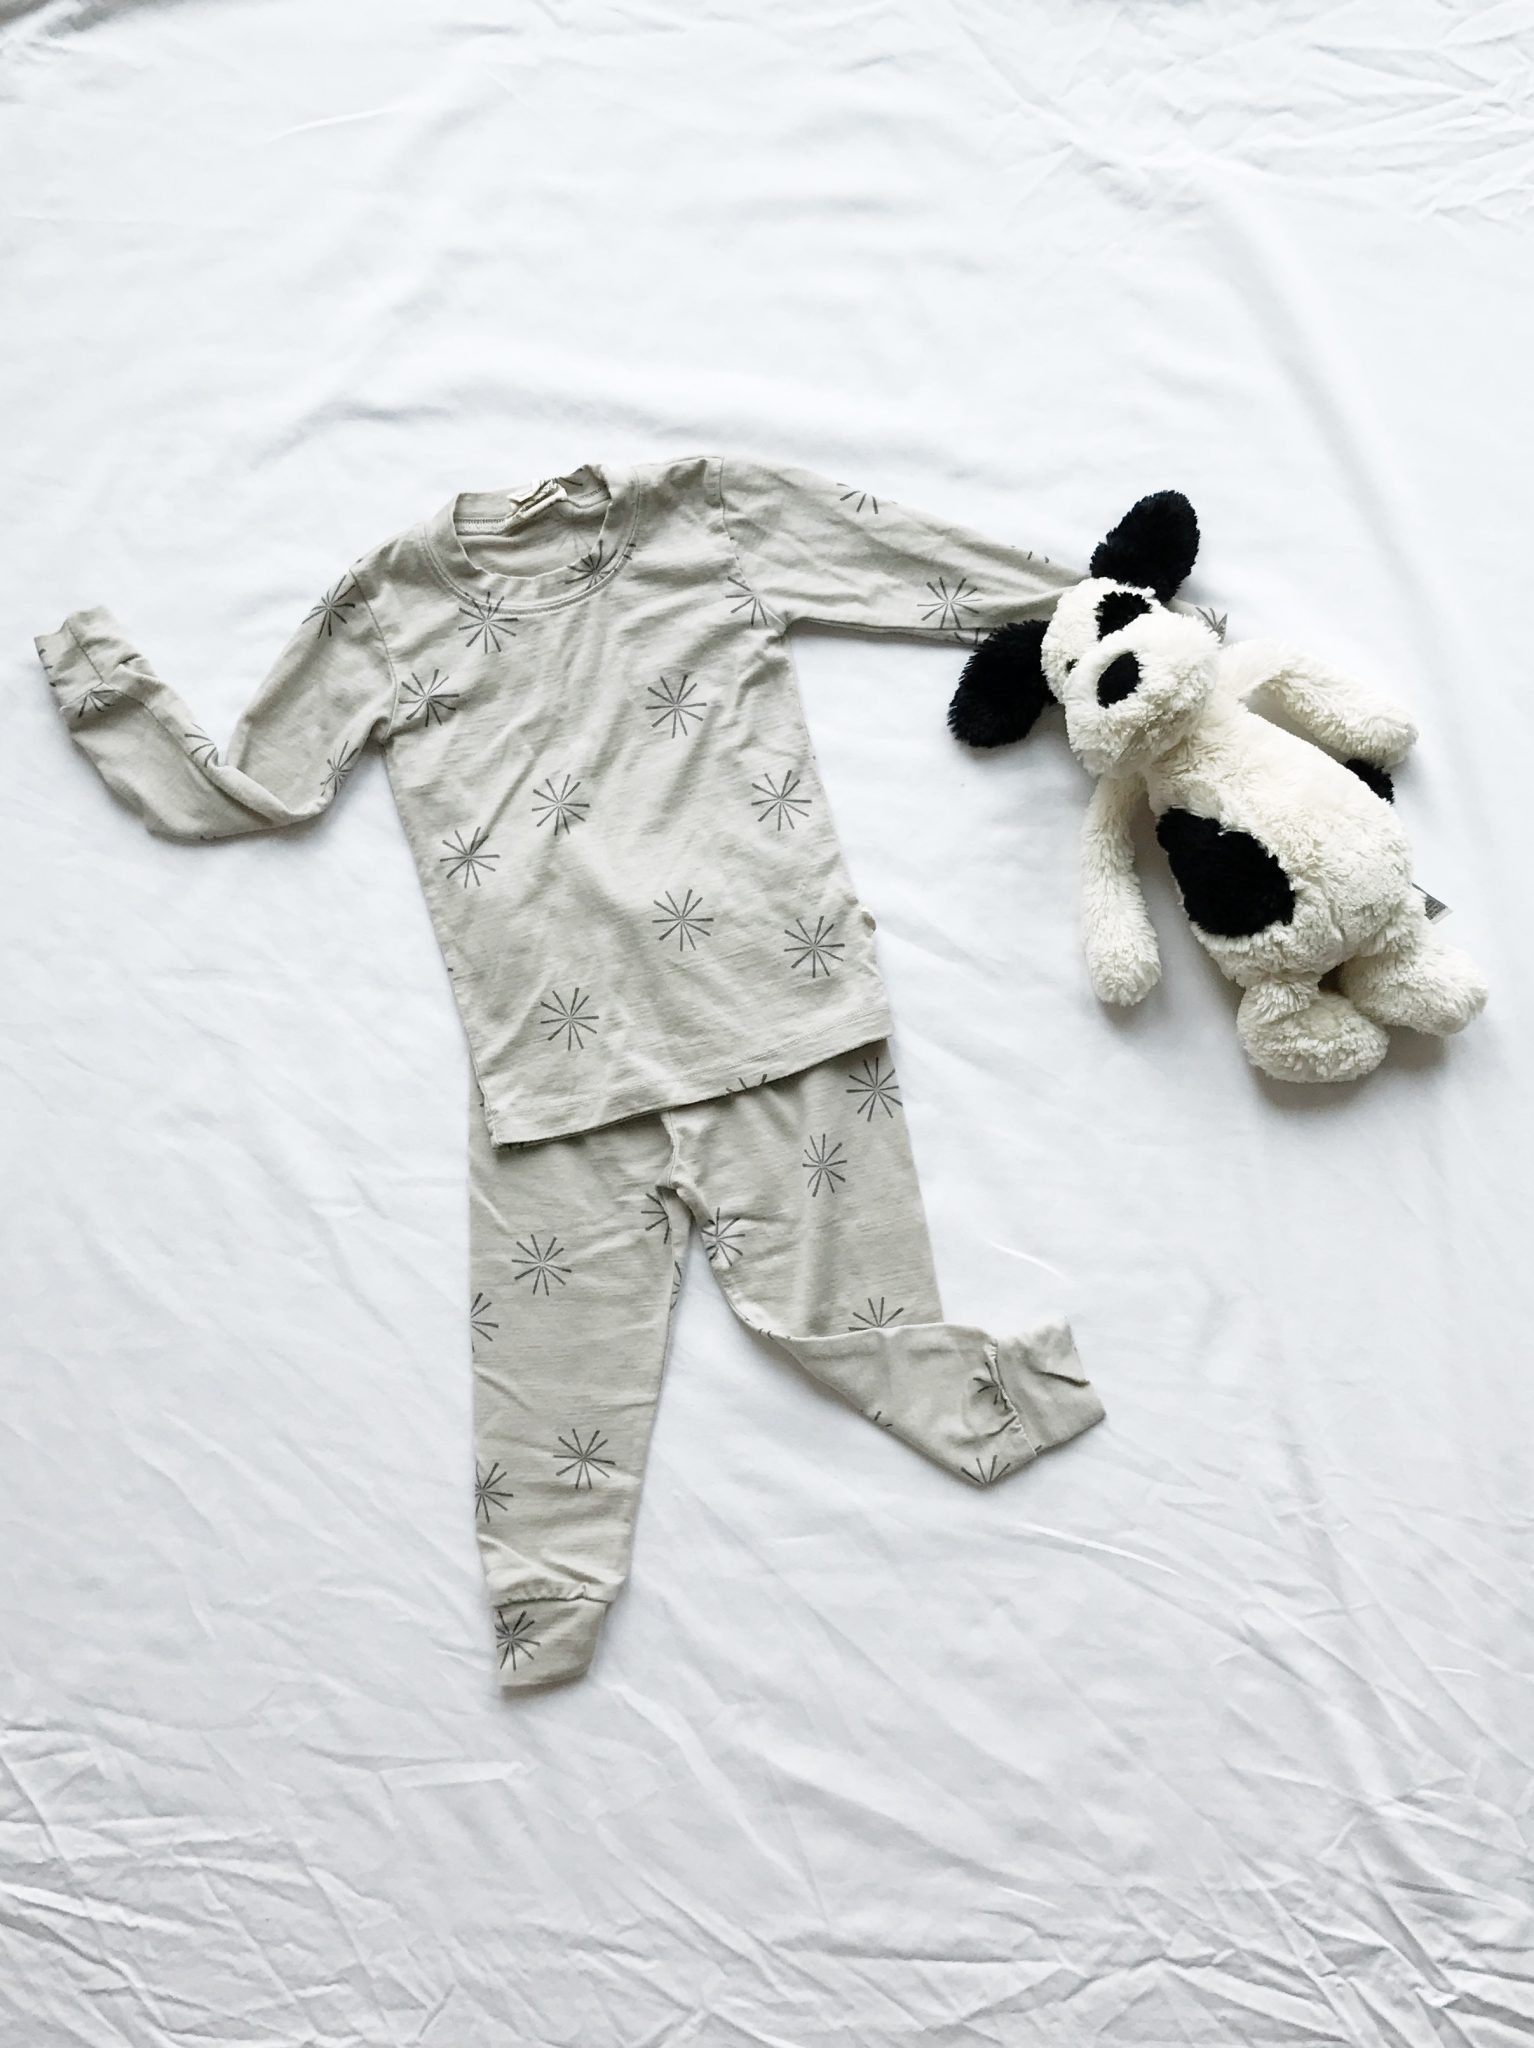 Ethical Clothing for Toddlers | www.LisaSamuel.com